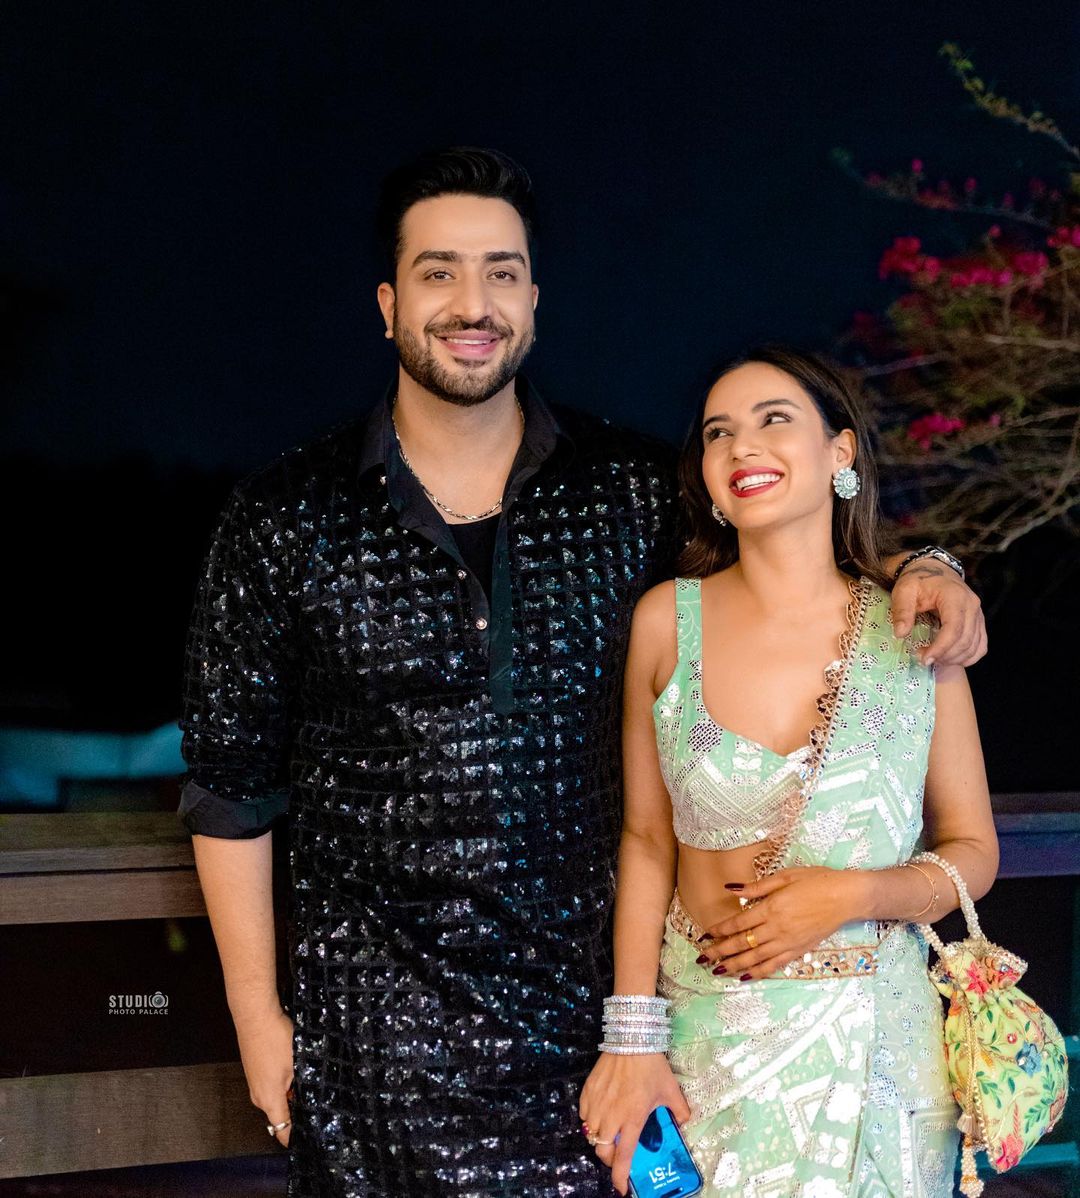 Jasmine Bhasin Revealed When She Will Get To Marry Her Boyfriend Aly Goni. She Met Her Childhood Friend After A Decade